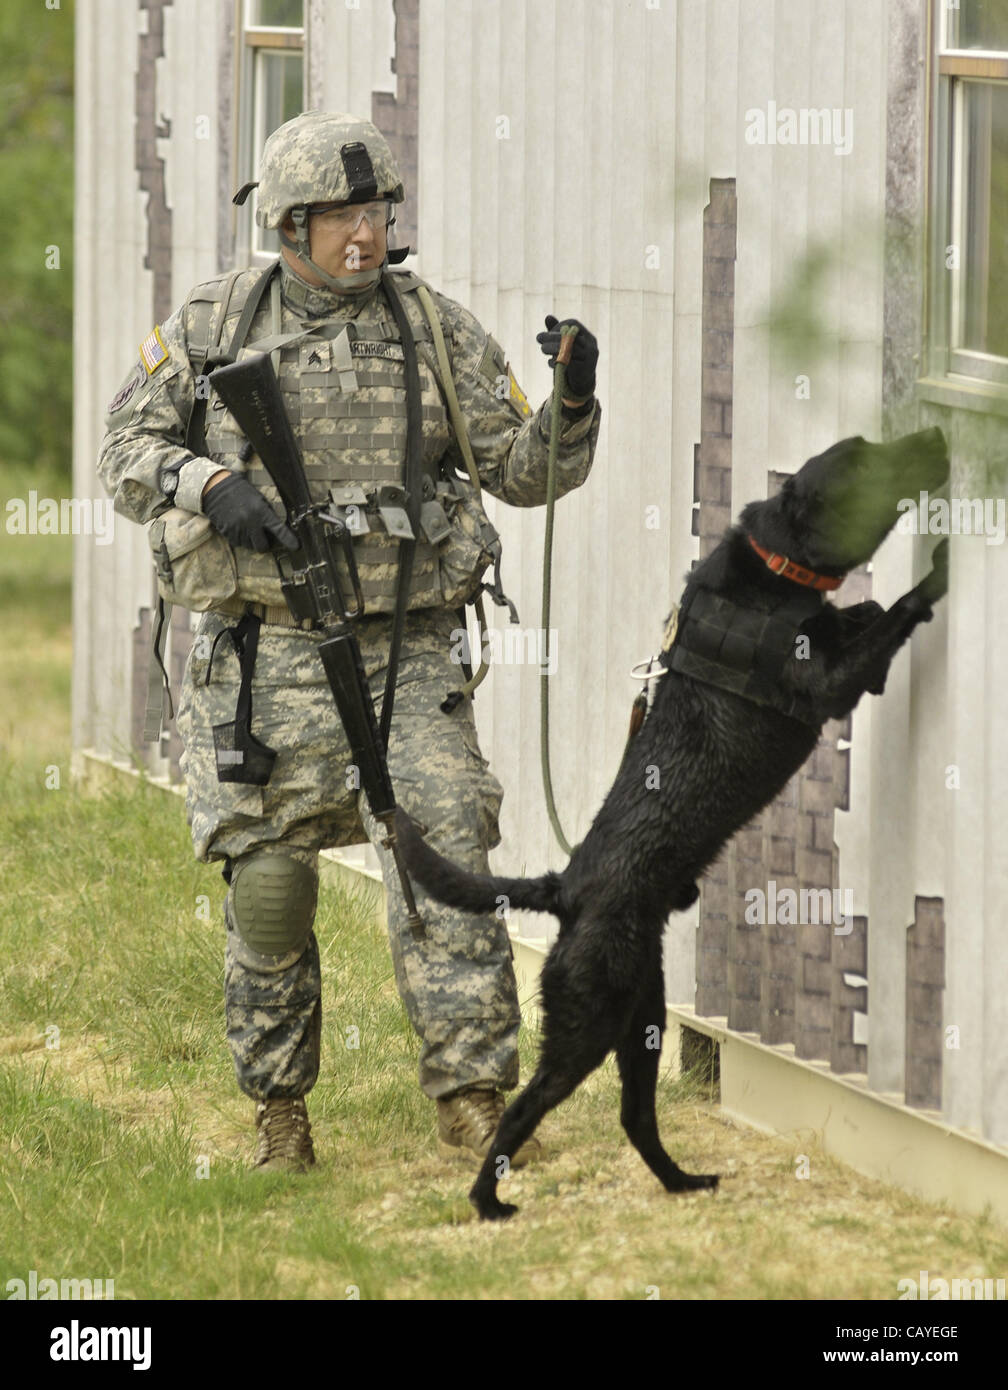 May 4, 2012 - DoD K9 Trials-May 4, 2012-Lackland Air Force Base-San Antonio, Texas---Sgt David Cartwright and his dog do a search mission in a mock villageduring the Department of Defense K9 Trials at Lackland Air Force Base in San Antonio, Texas.  They'll test military working dog teams in a variet Stock Photo